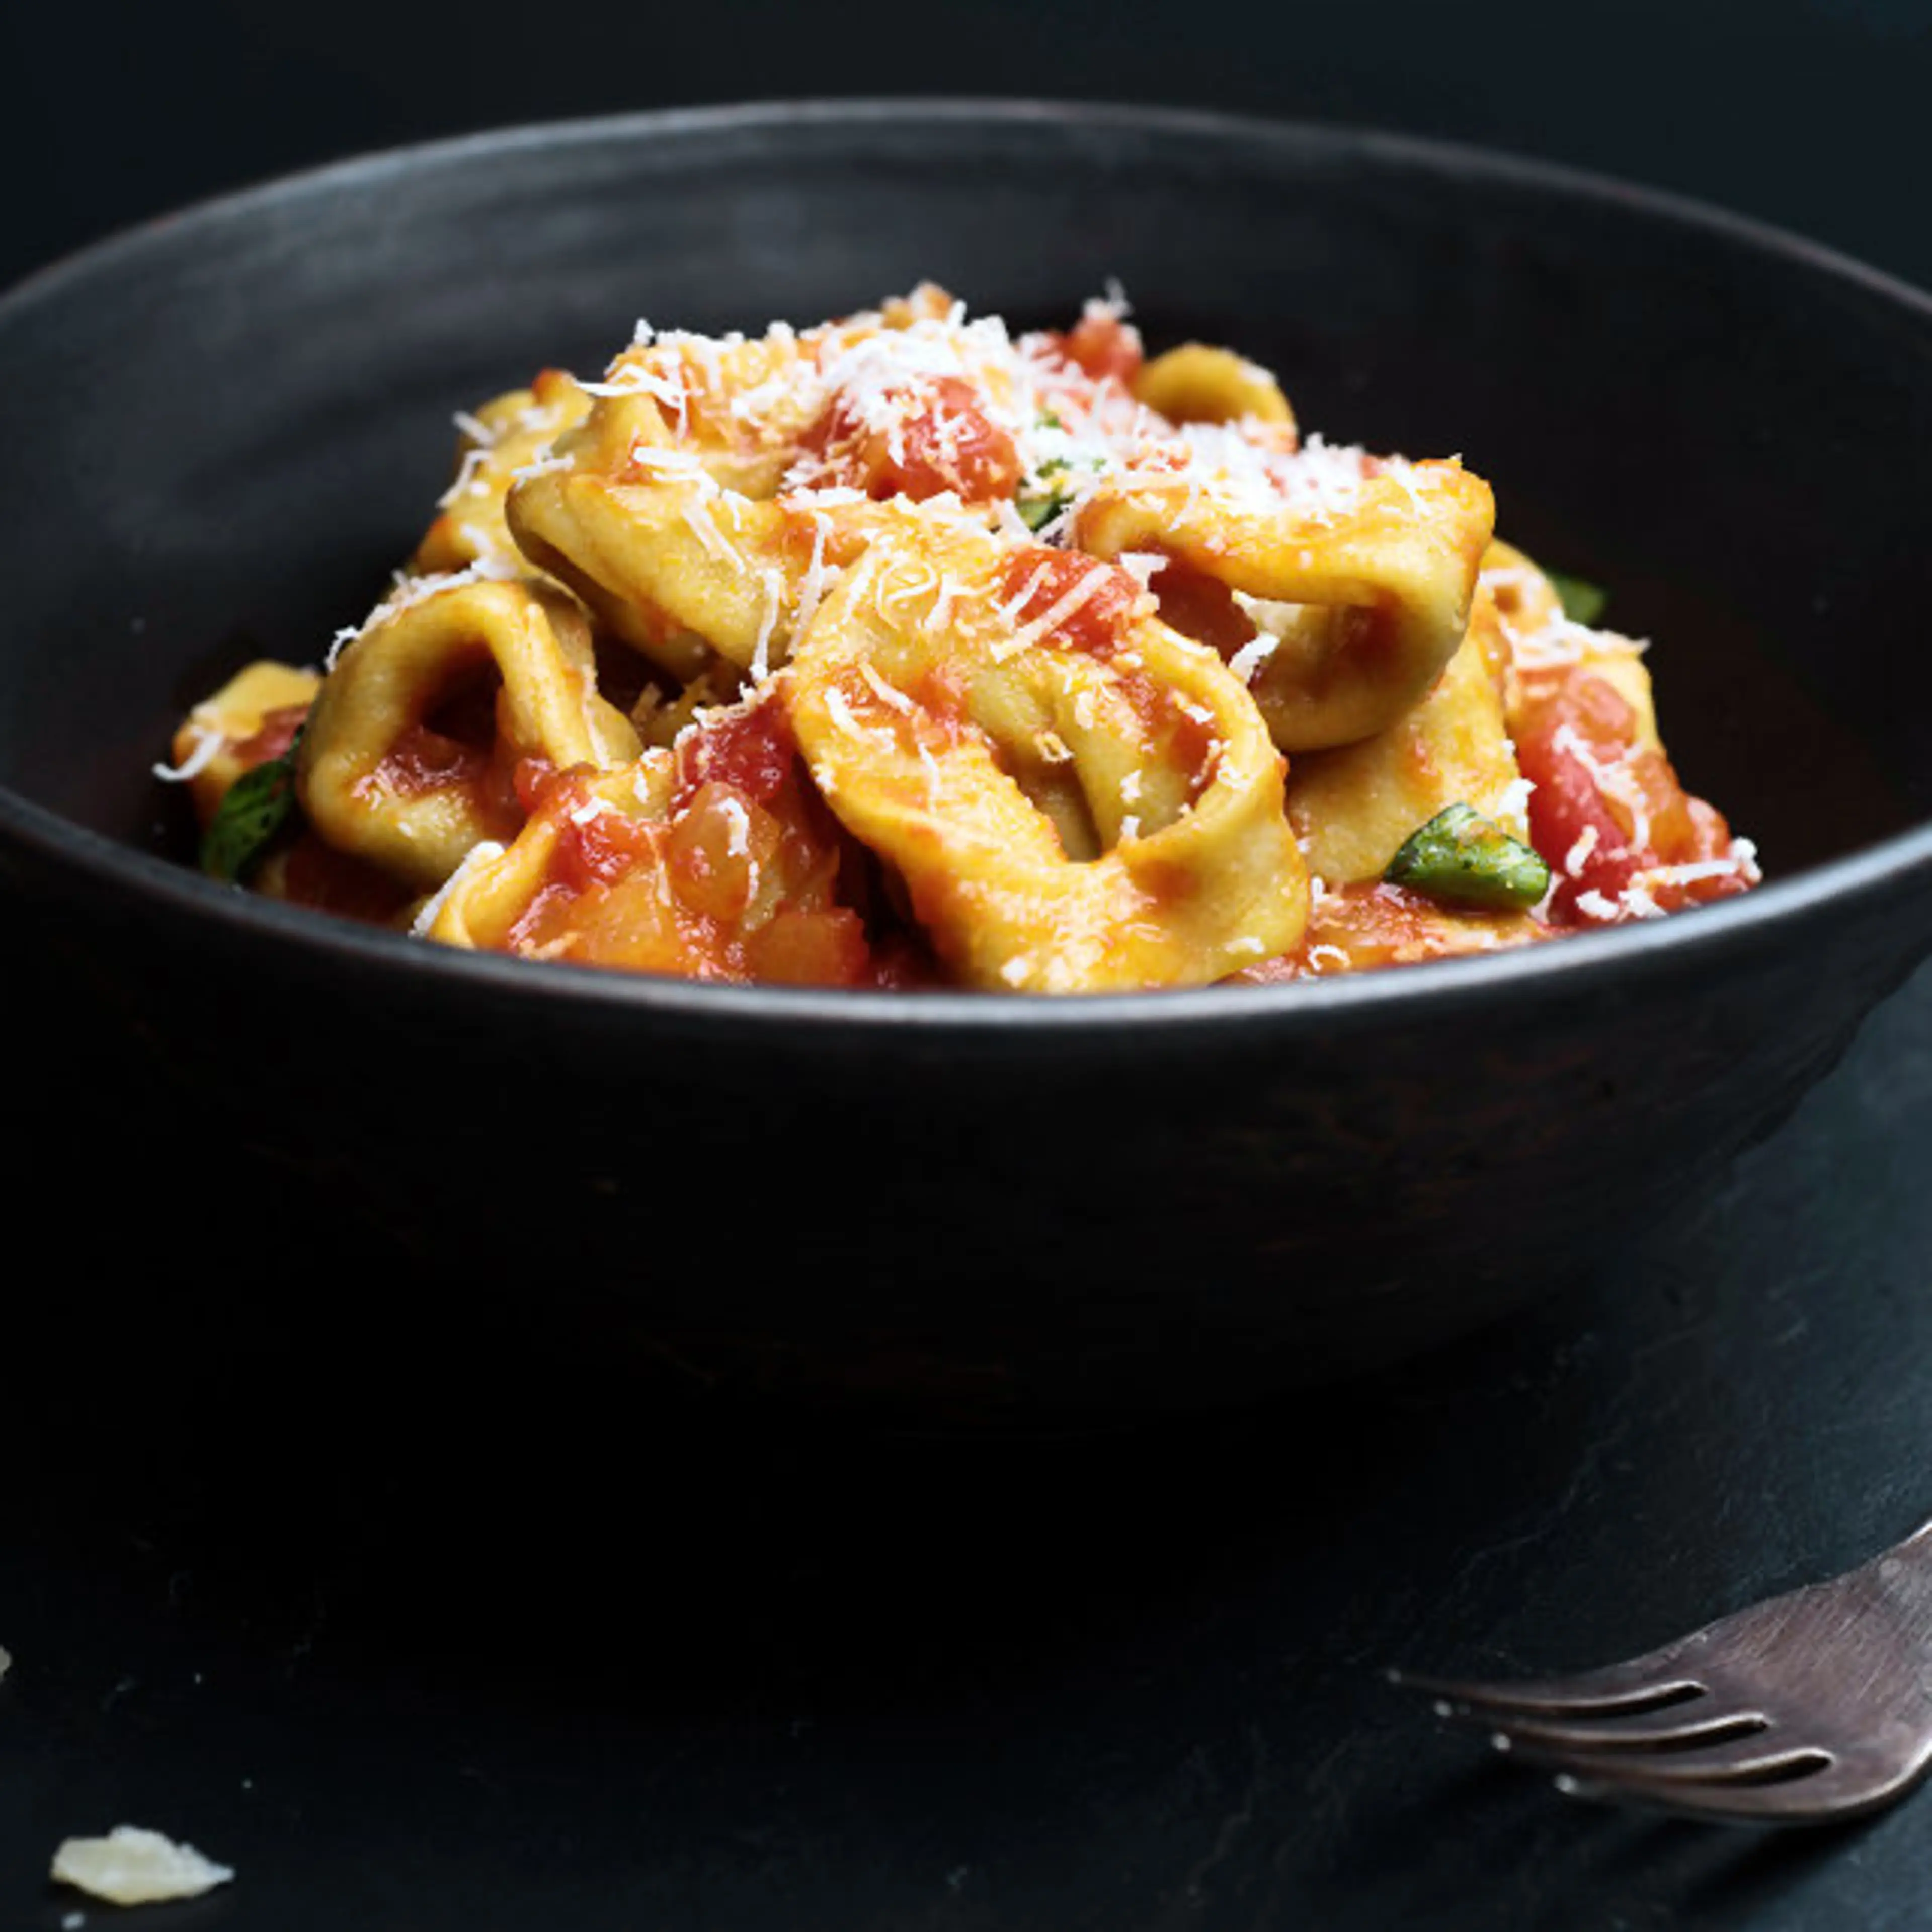 Classic Meat Tortellini With Tomato Sauce